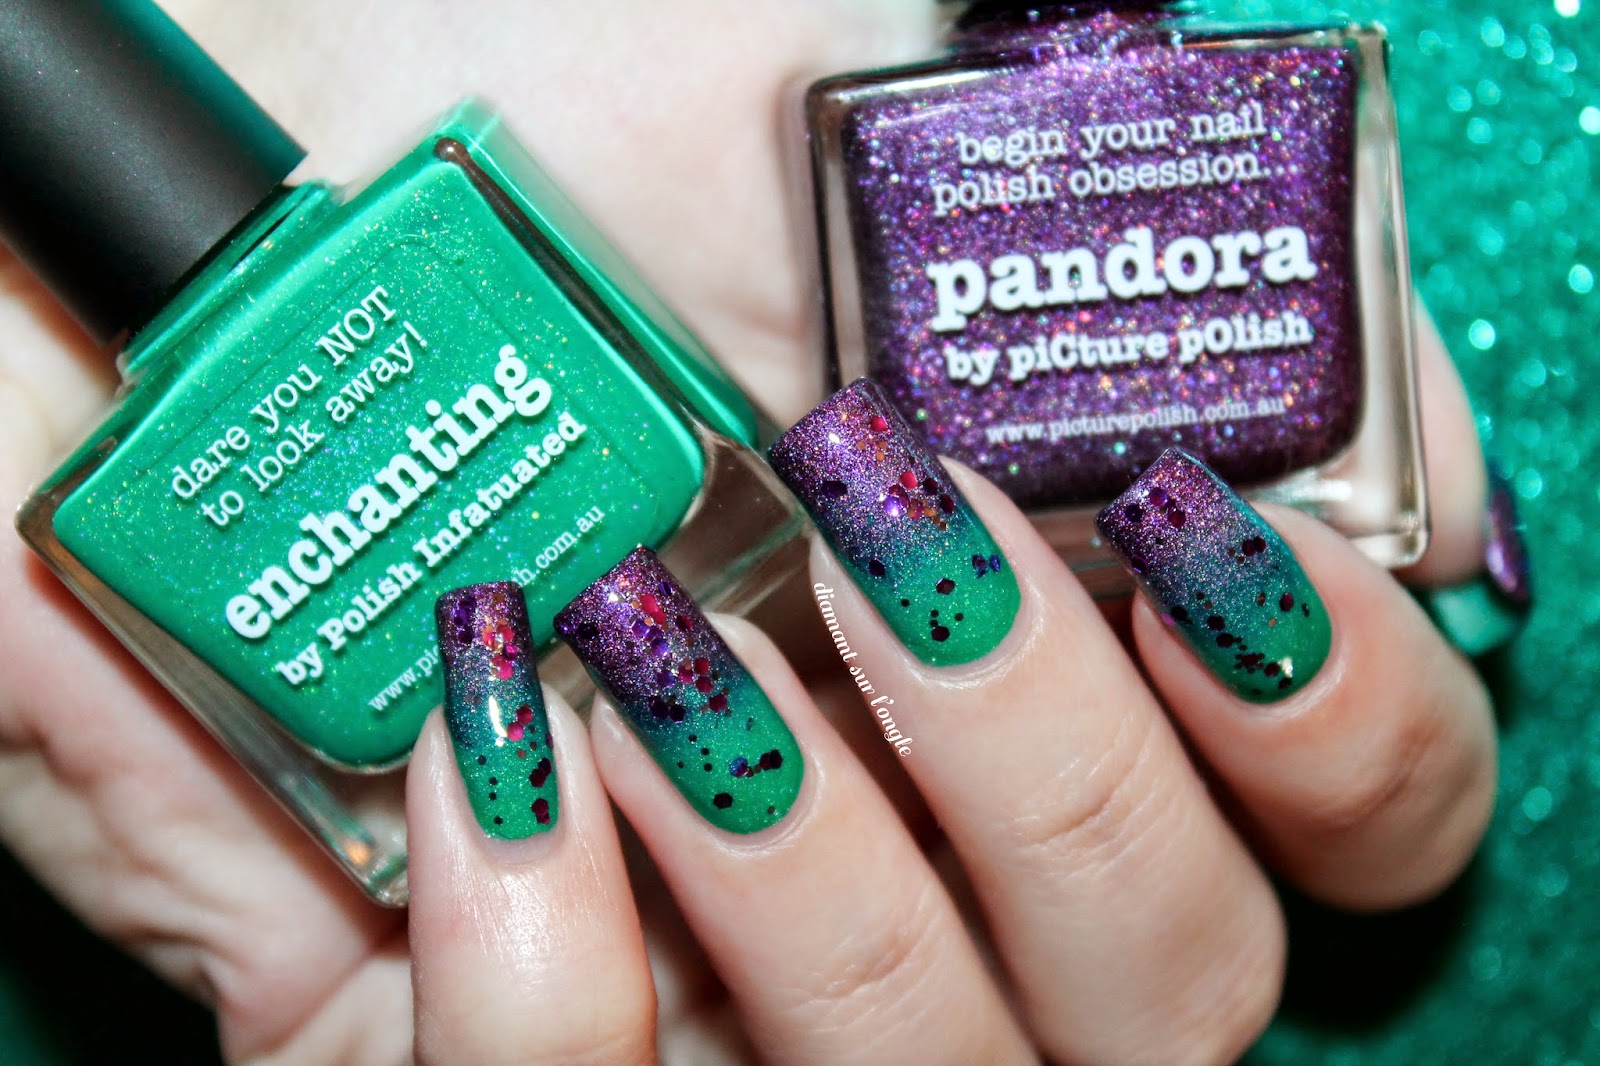 Enchanting and Pandora from Picture Polish